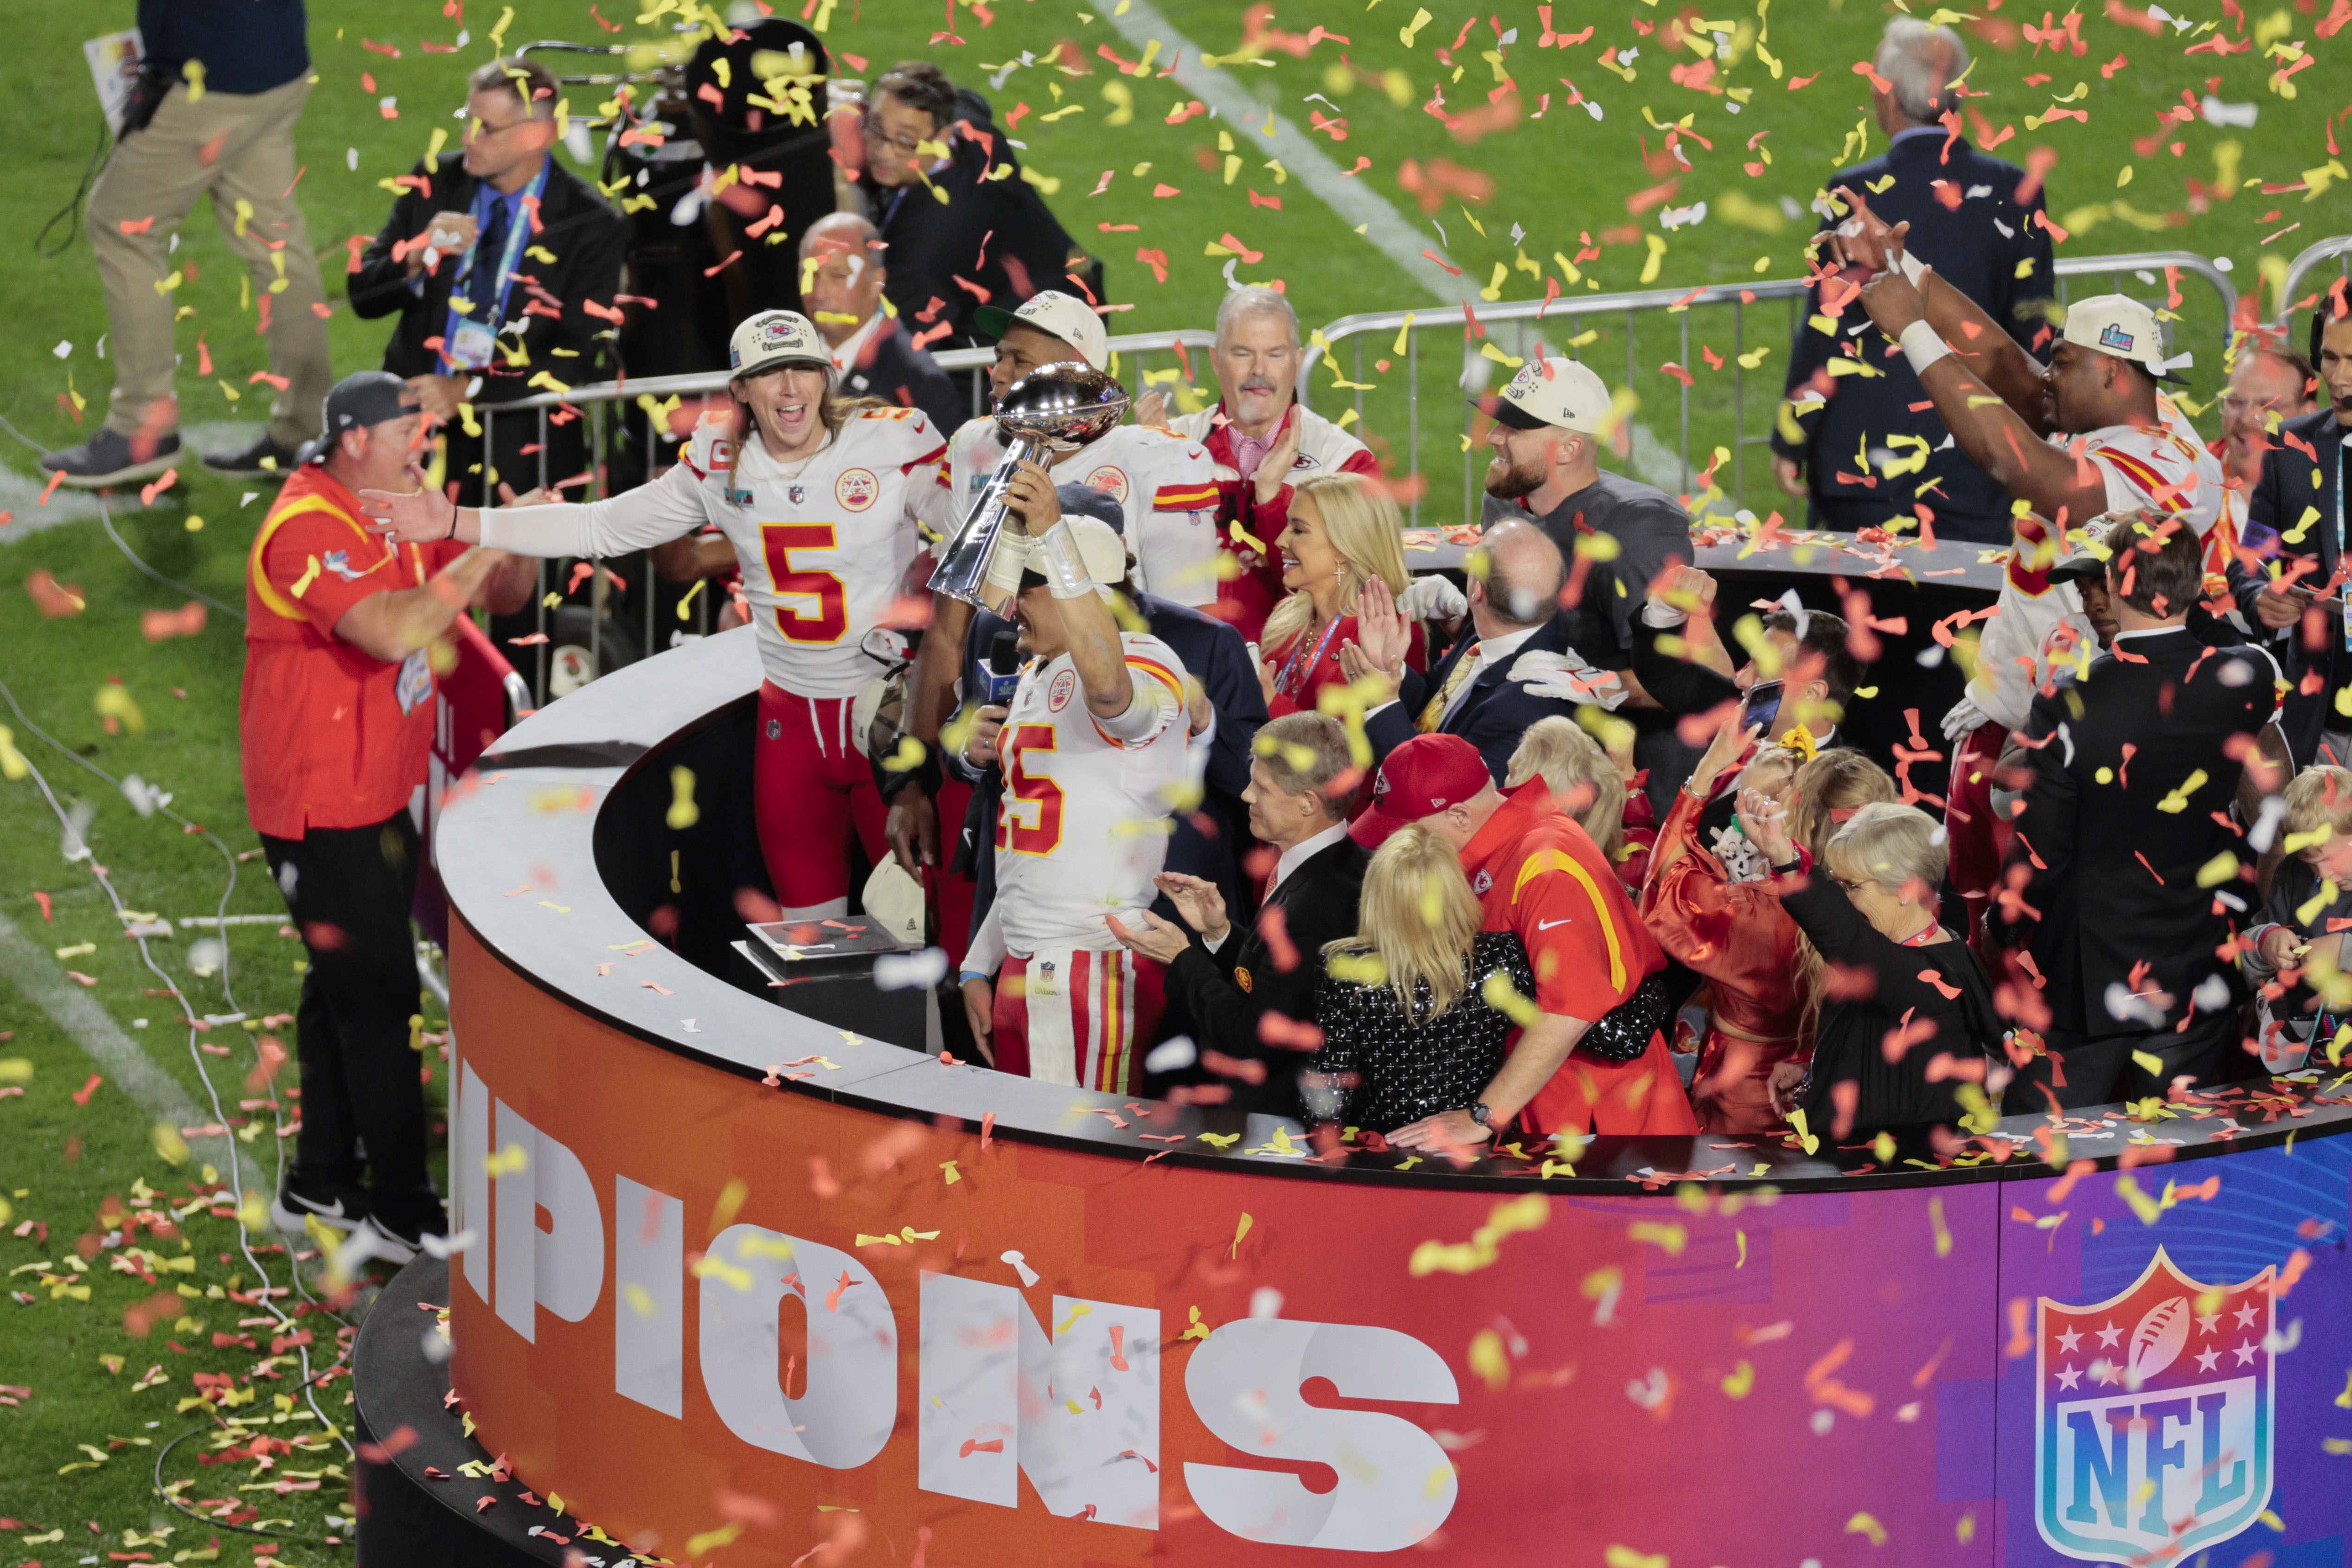 Super Bowl 2023 winners & losers: Patrick Mahomes, Andy Reid solidify  Chiefs dynasty; Eagles flop in second half